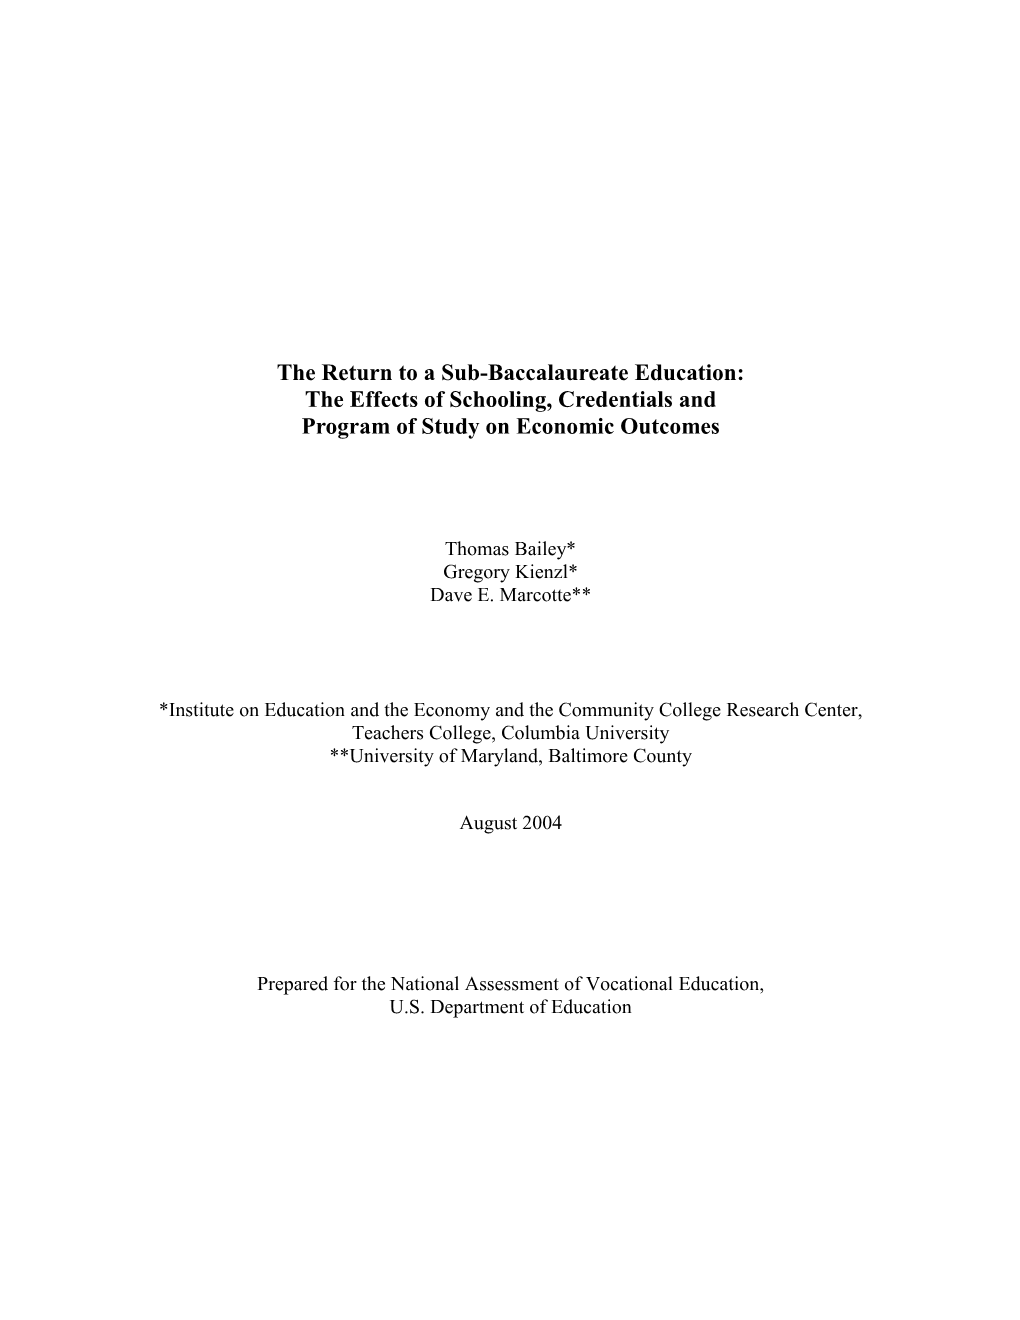 The Return to a Sub-Baccalaureate Education: the Effects of Schooling, Credentials And